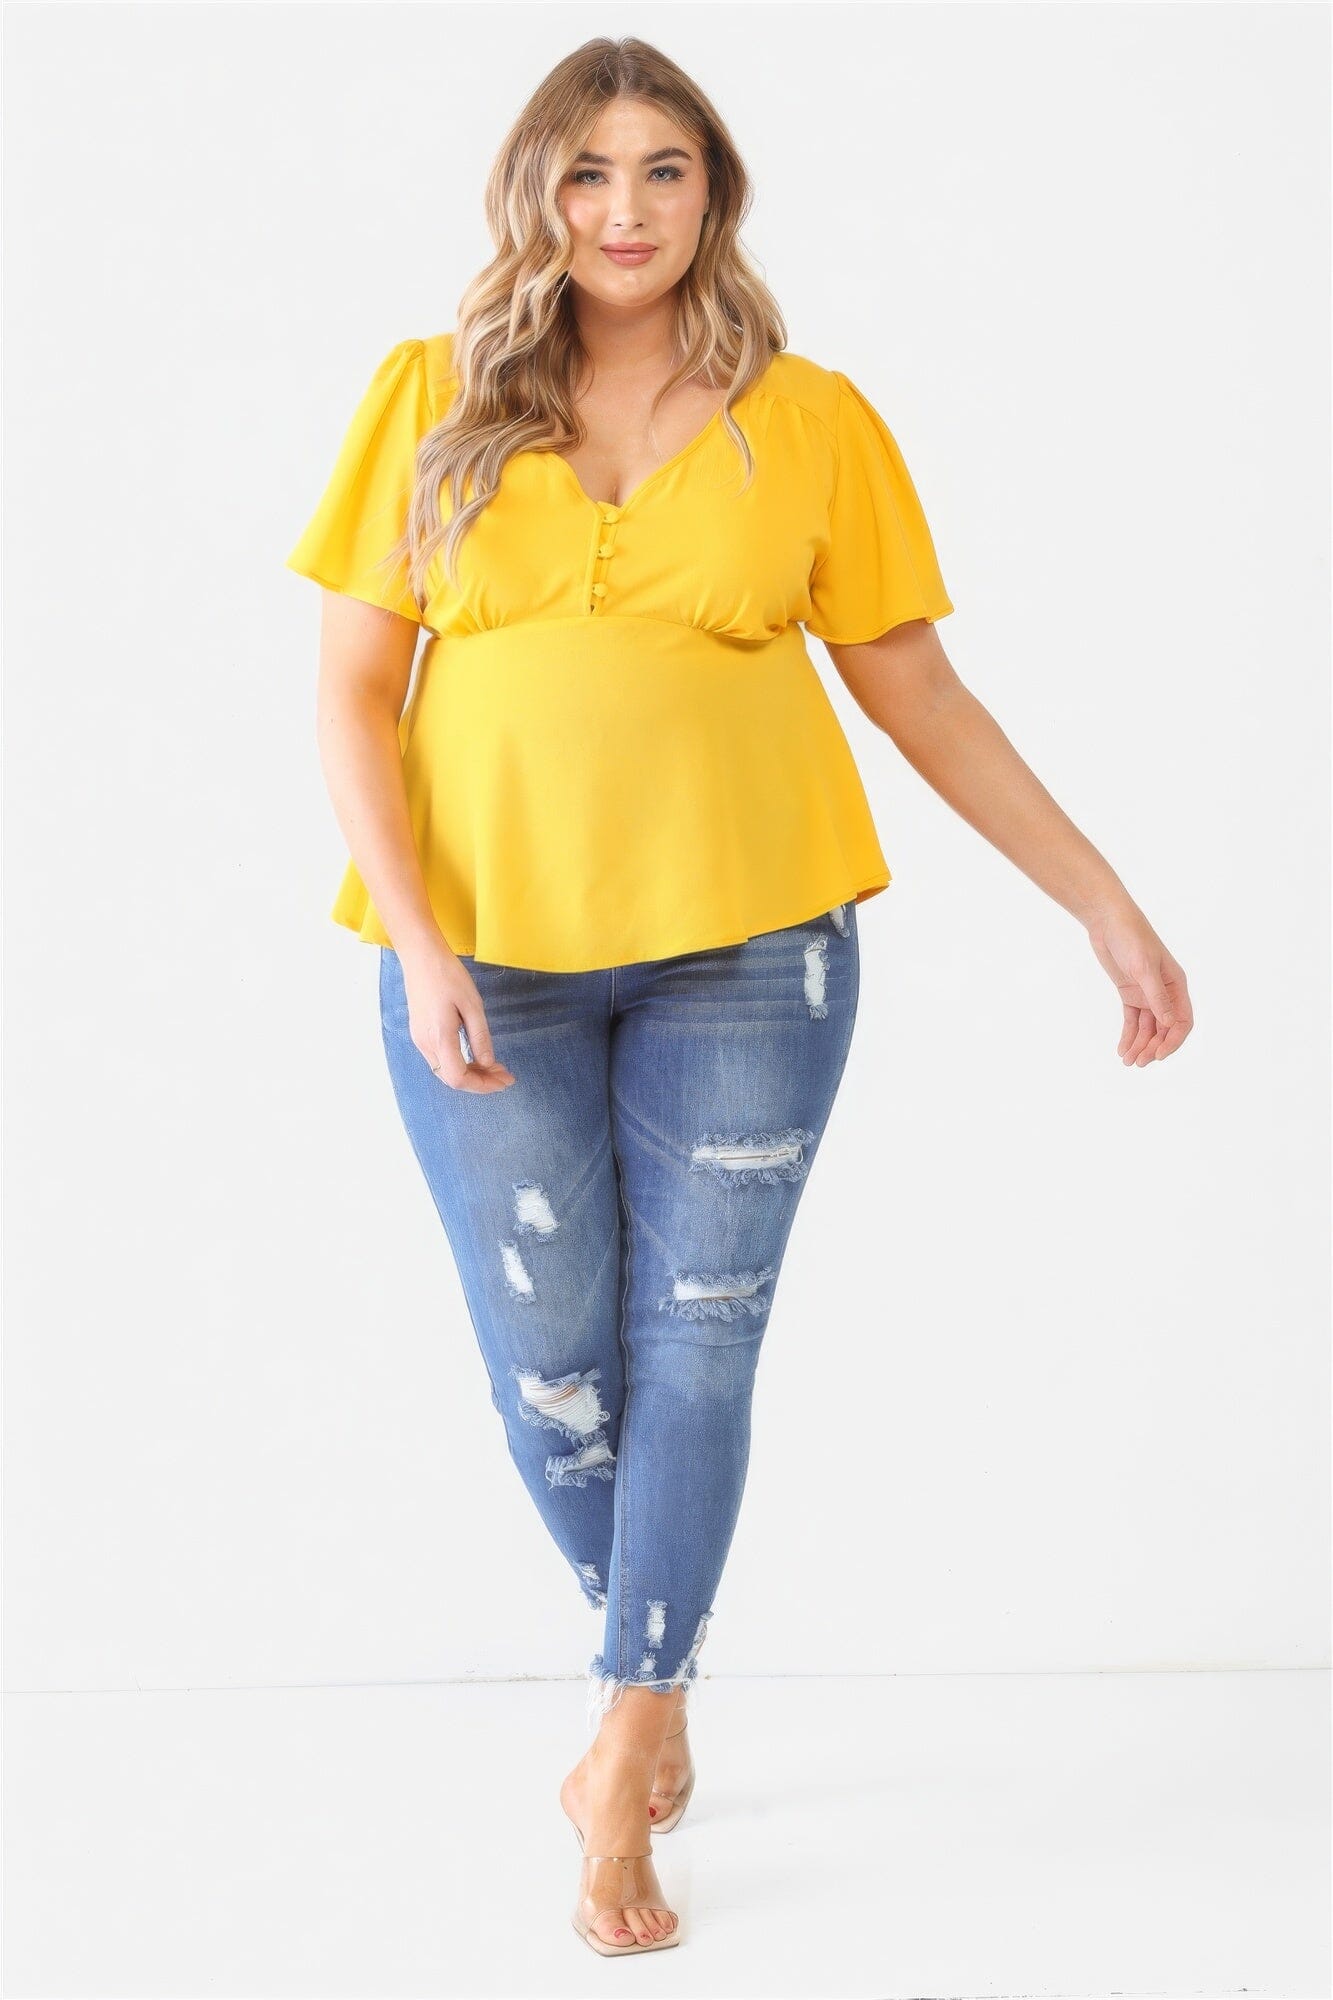 Yellow Plus Size Button Up V Neck Short Sleeve Flare Top Shirts & Tops jehouze 1XL 